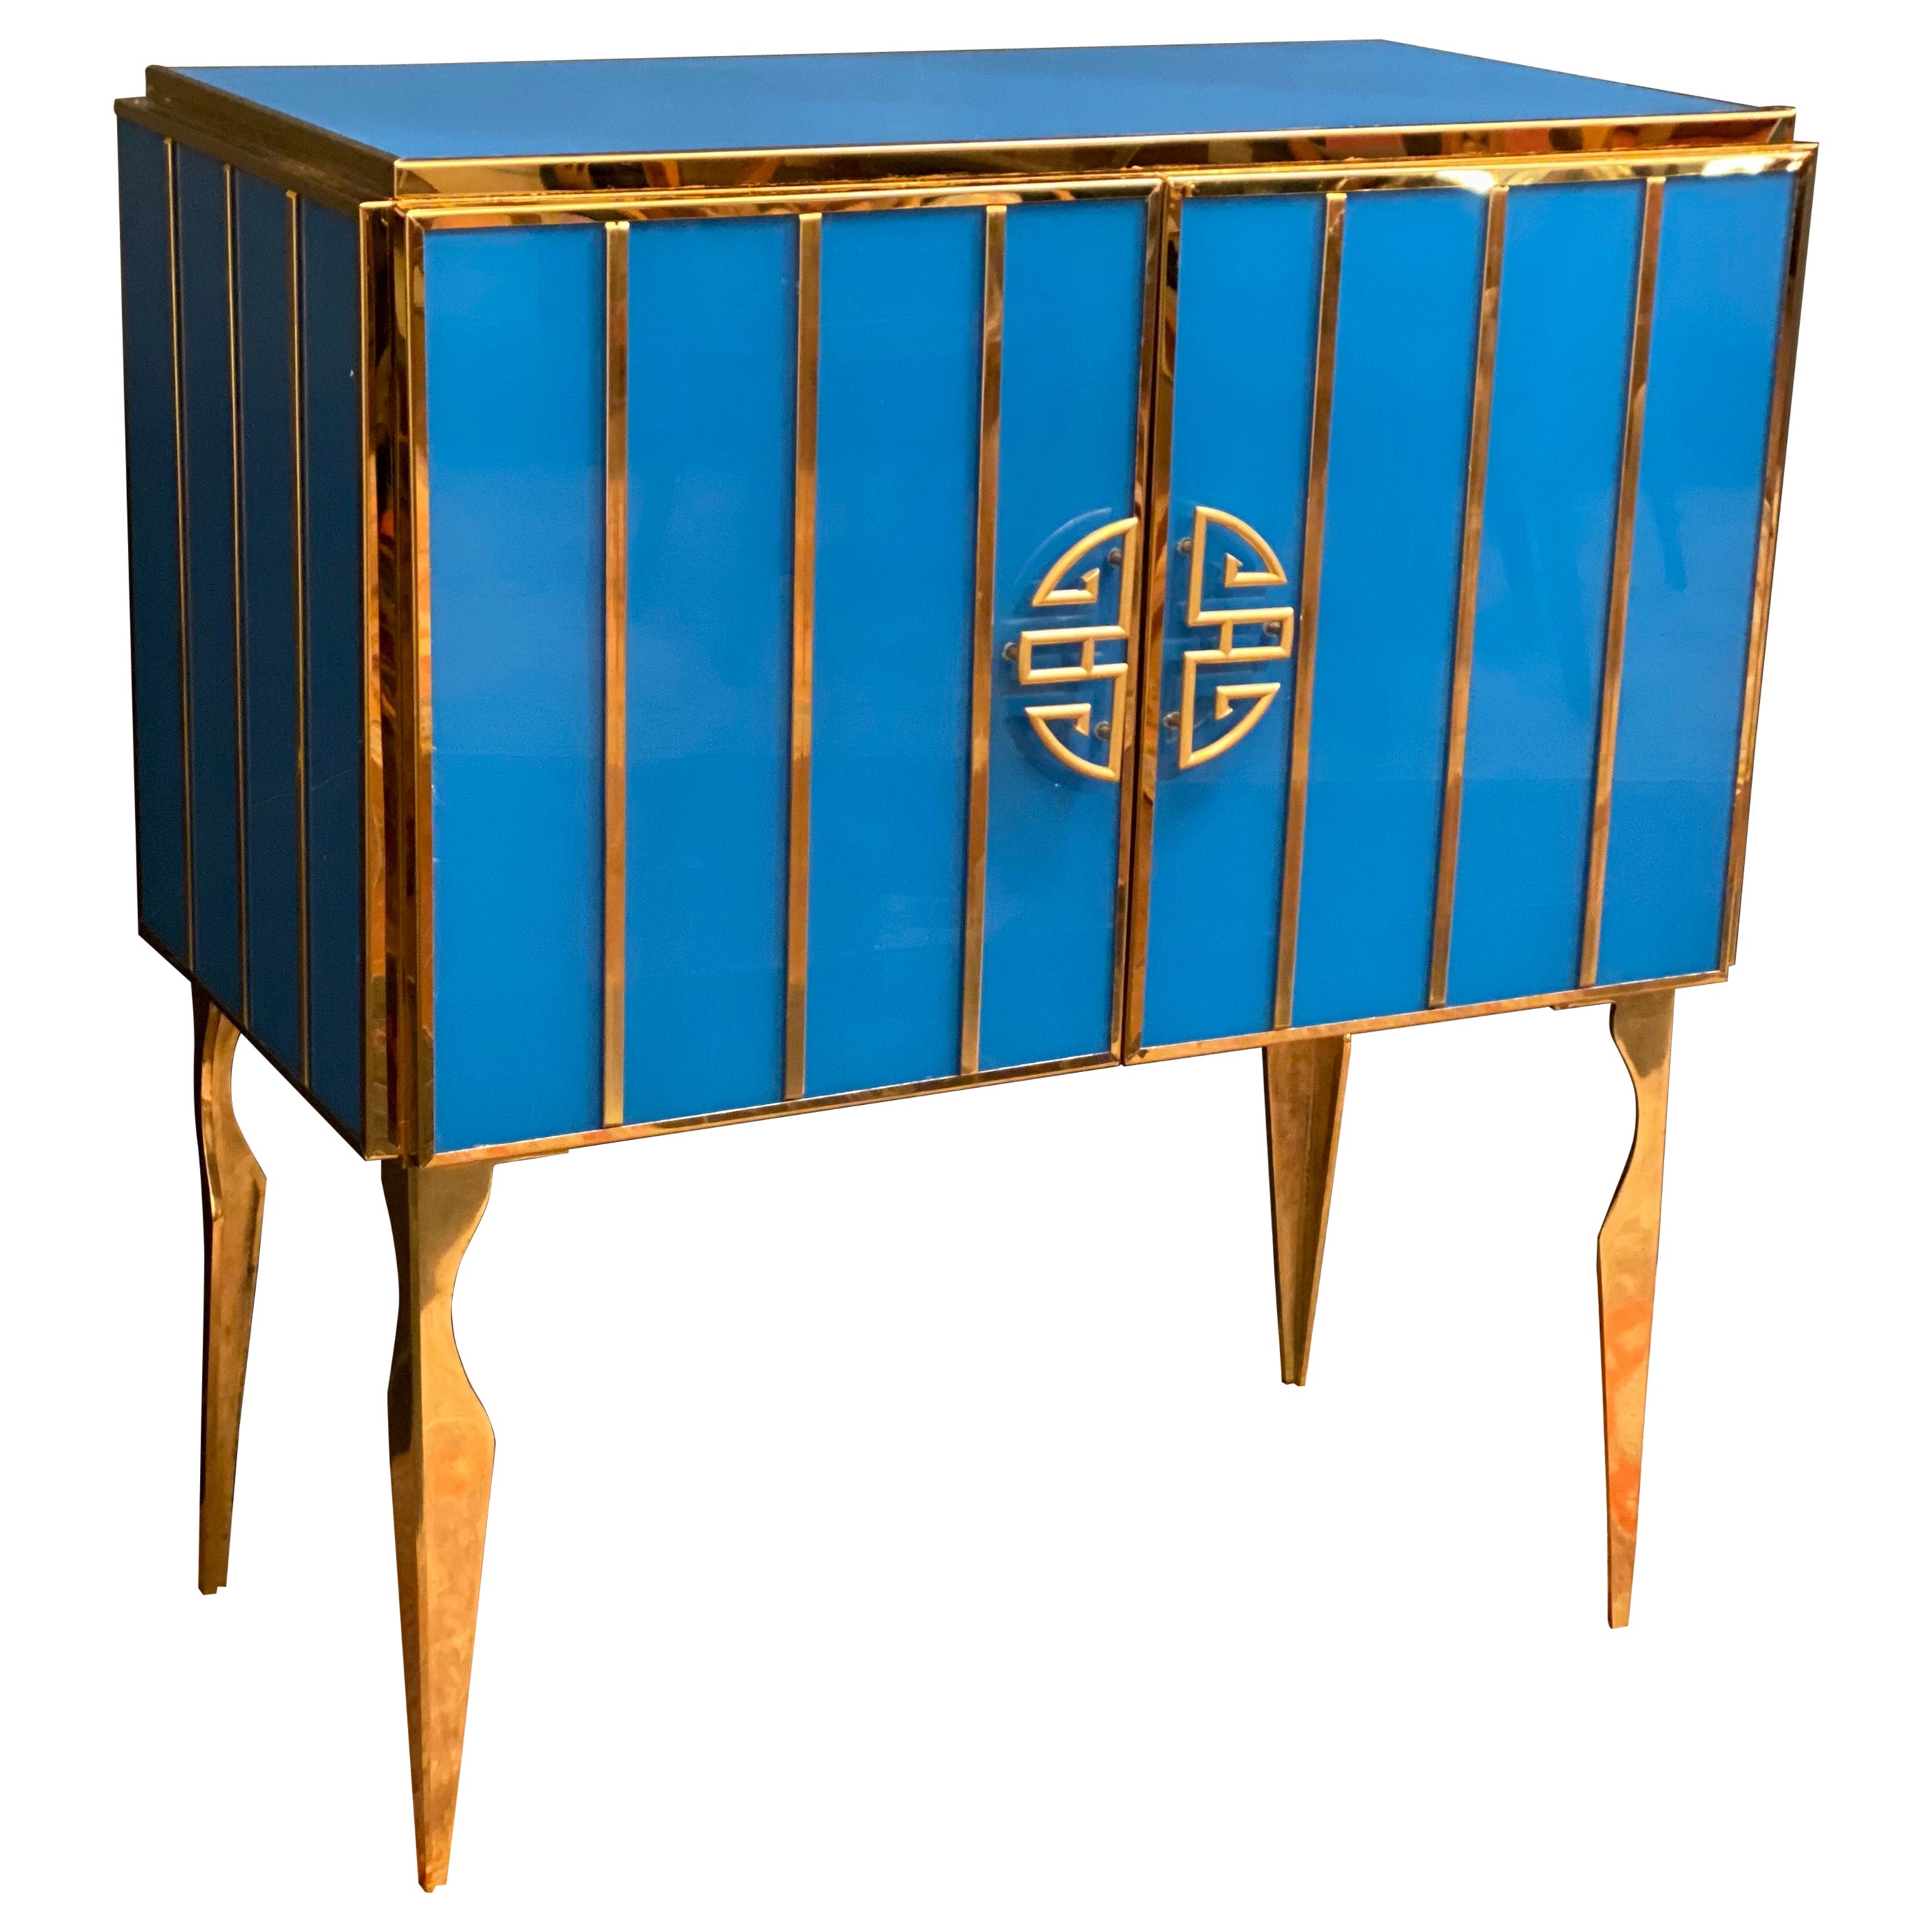 Midcentury Style Brass and Blu Murano Glass Bar Cabinet, 2020 For Sale